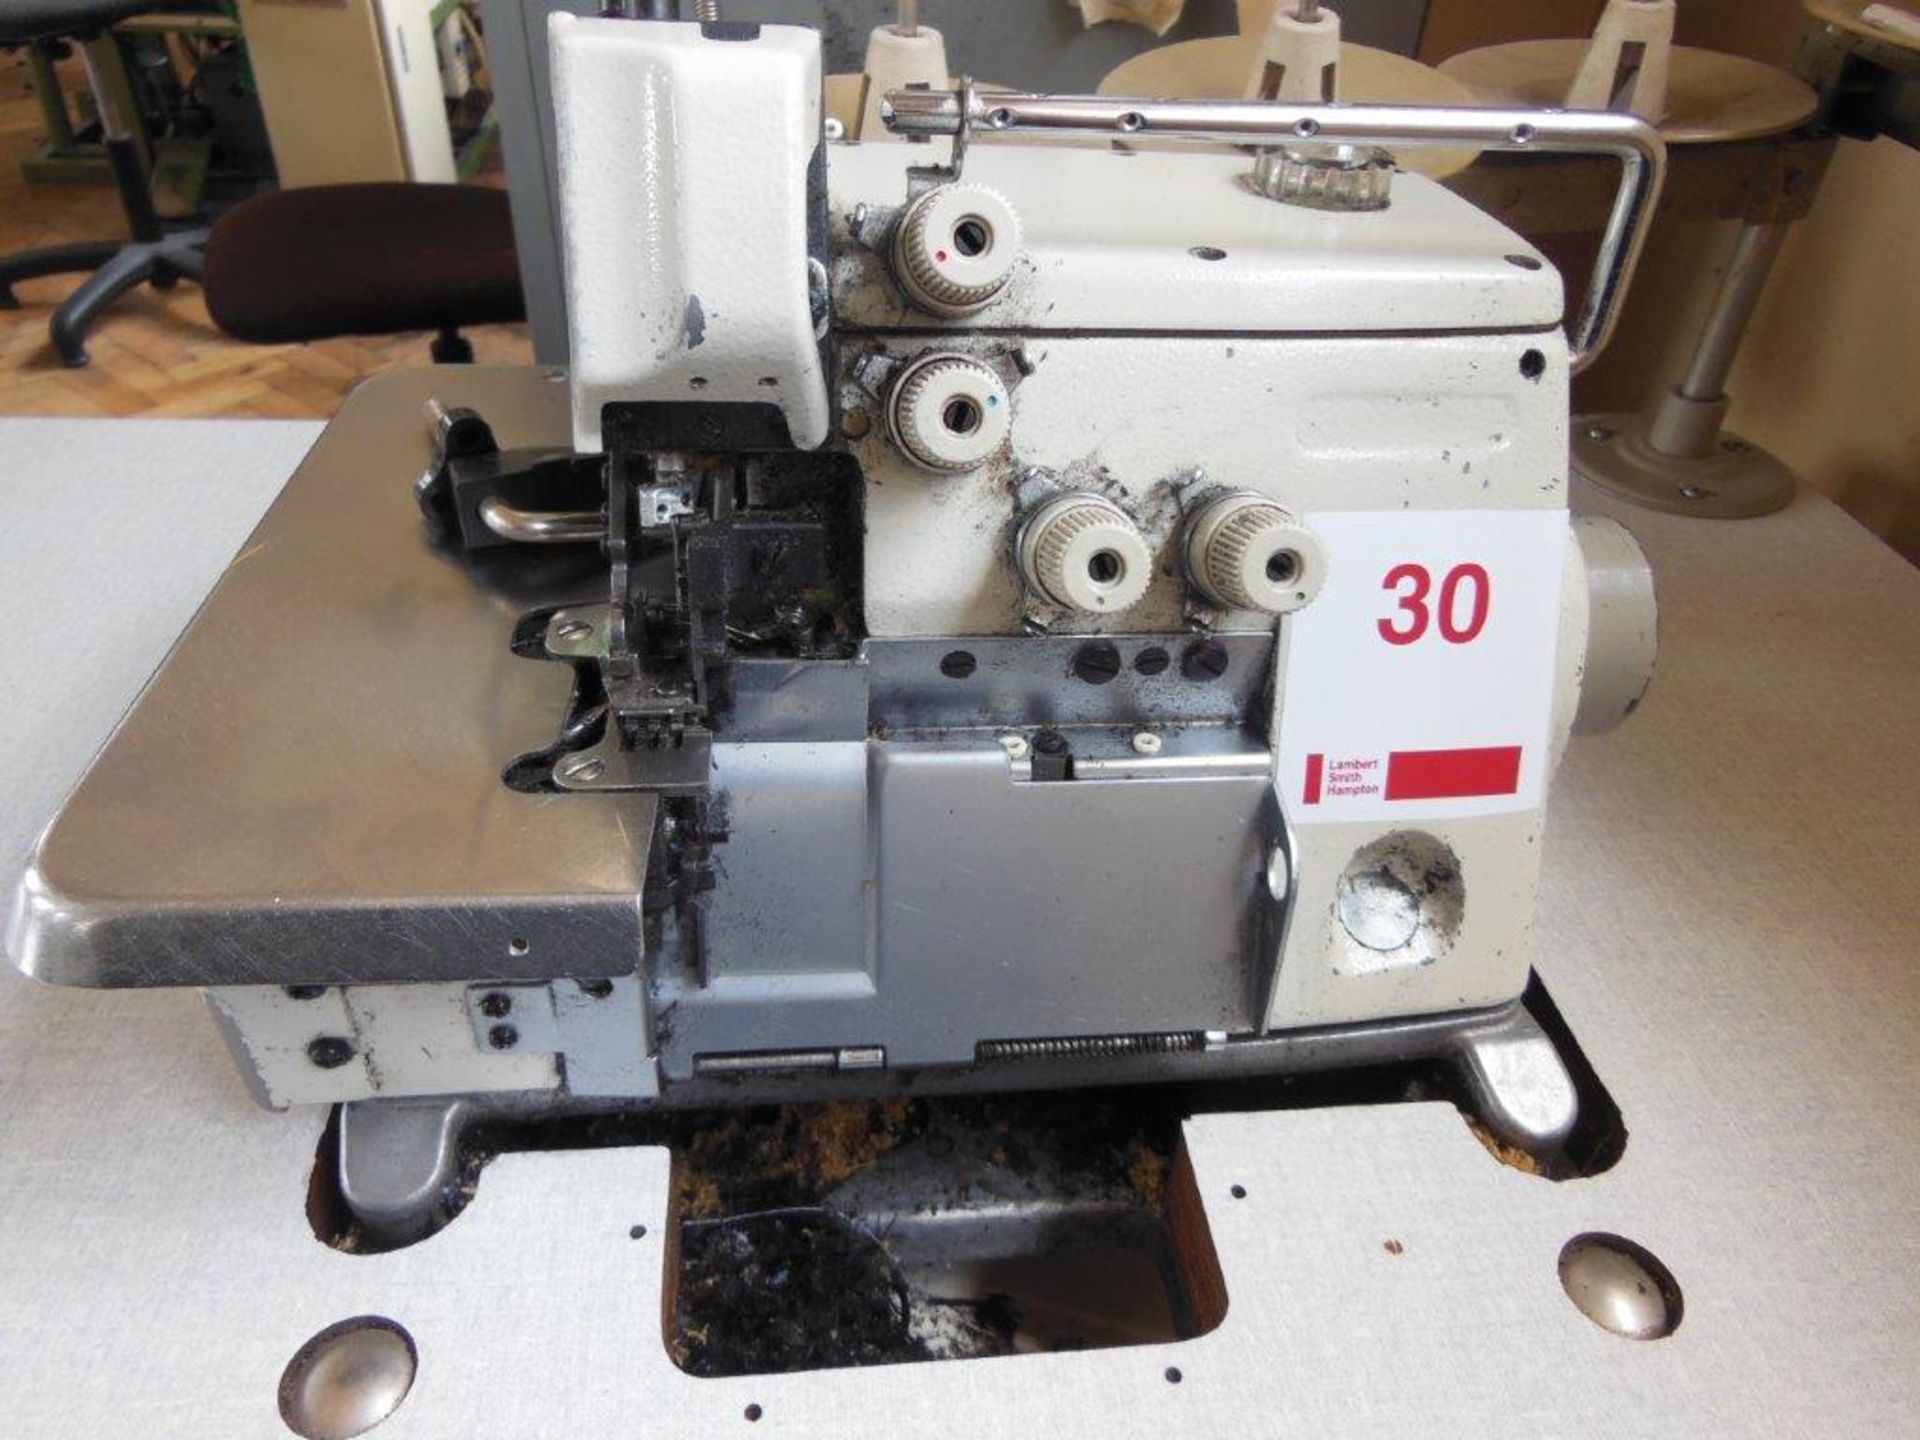 Brother MA4-B551 overlock industrial sewing machine, single phase. NB: this item has no CE marking. - Image 2 of 4